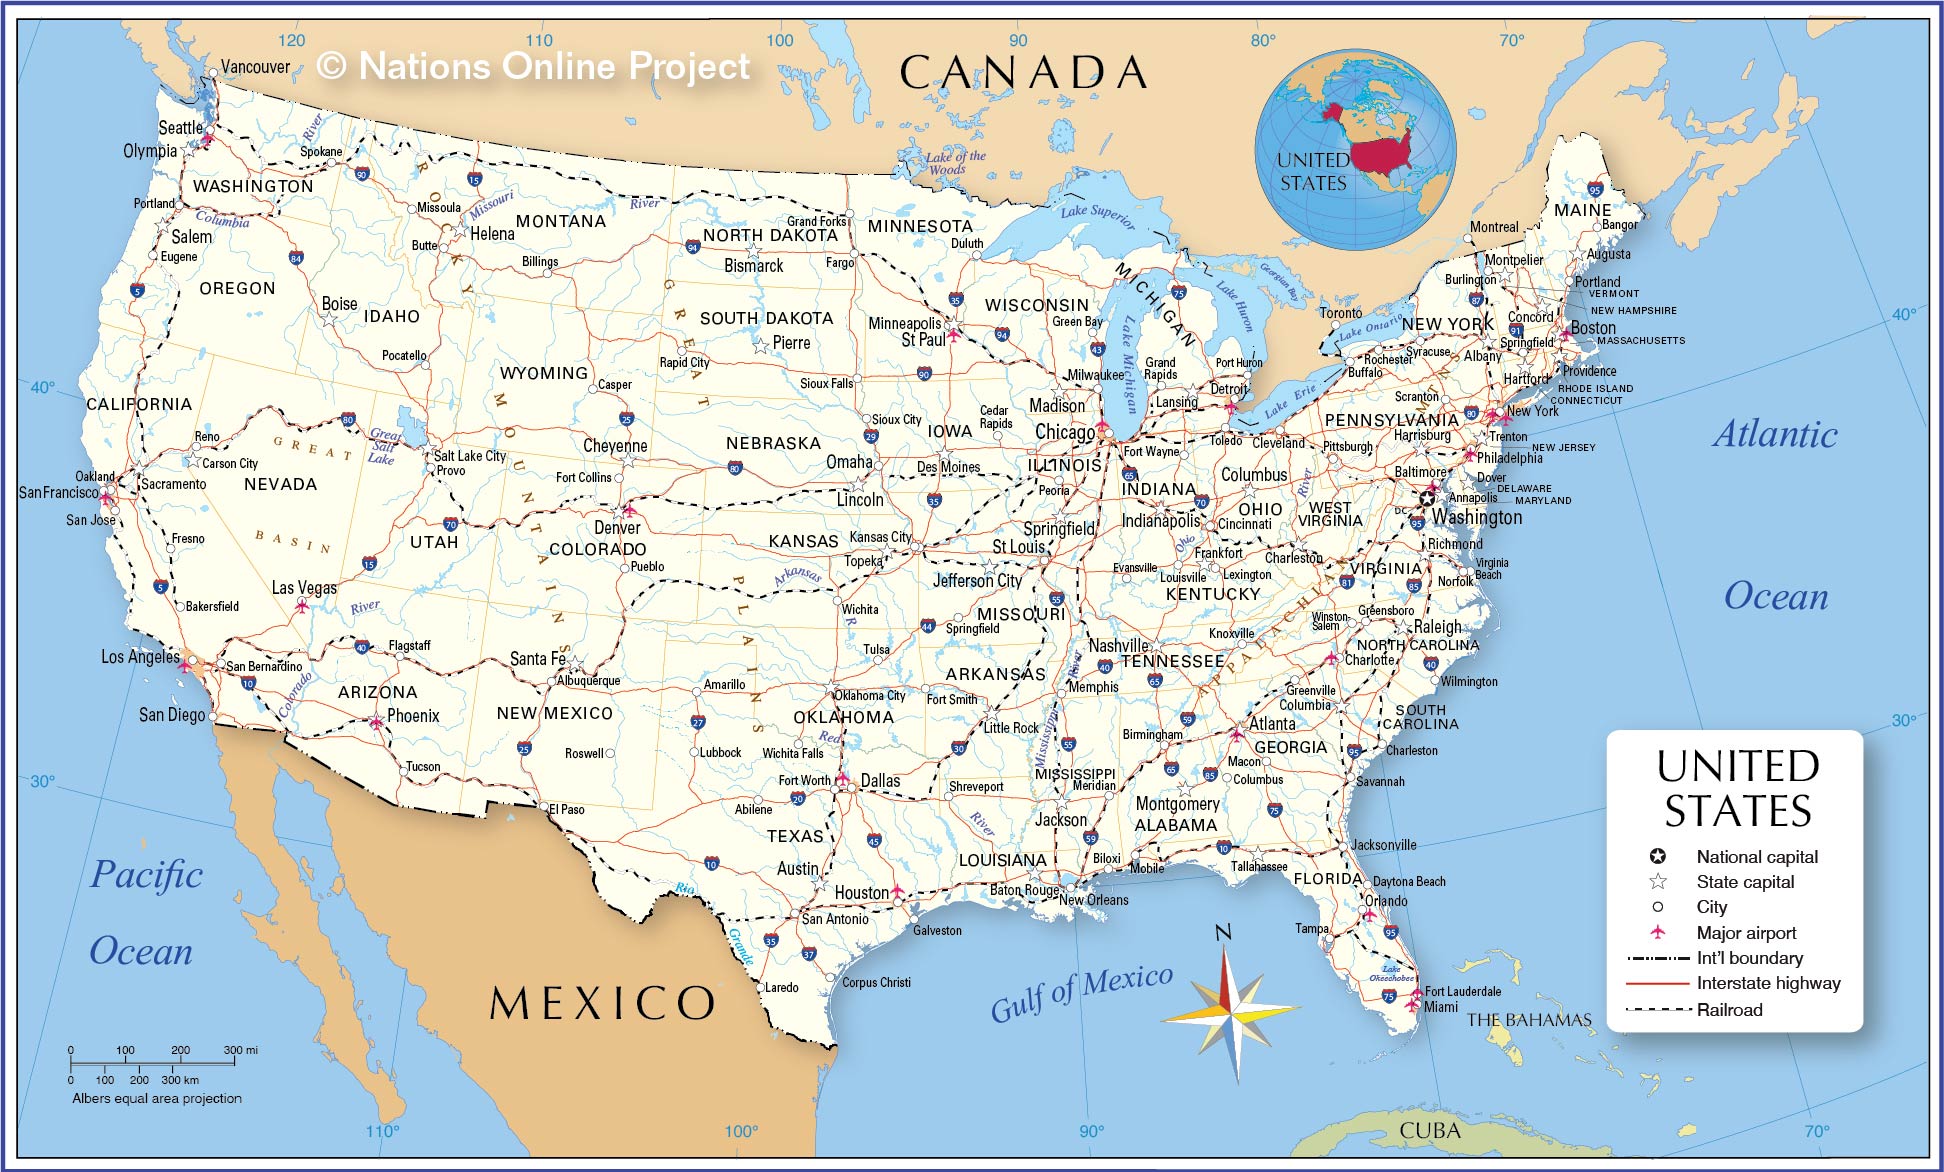 map-of-the-united-states-nations-online-project